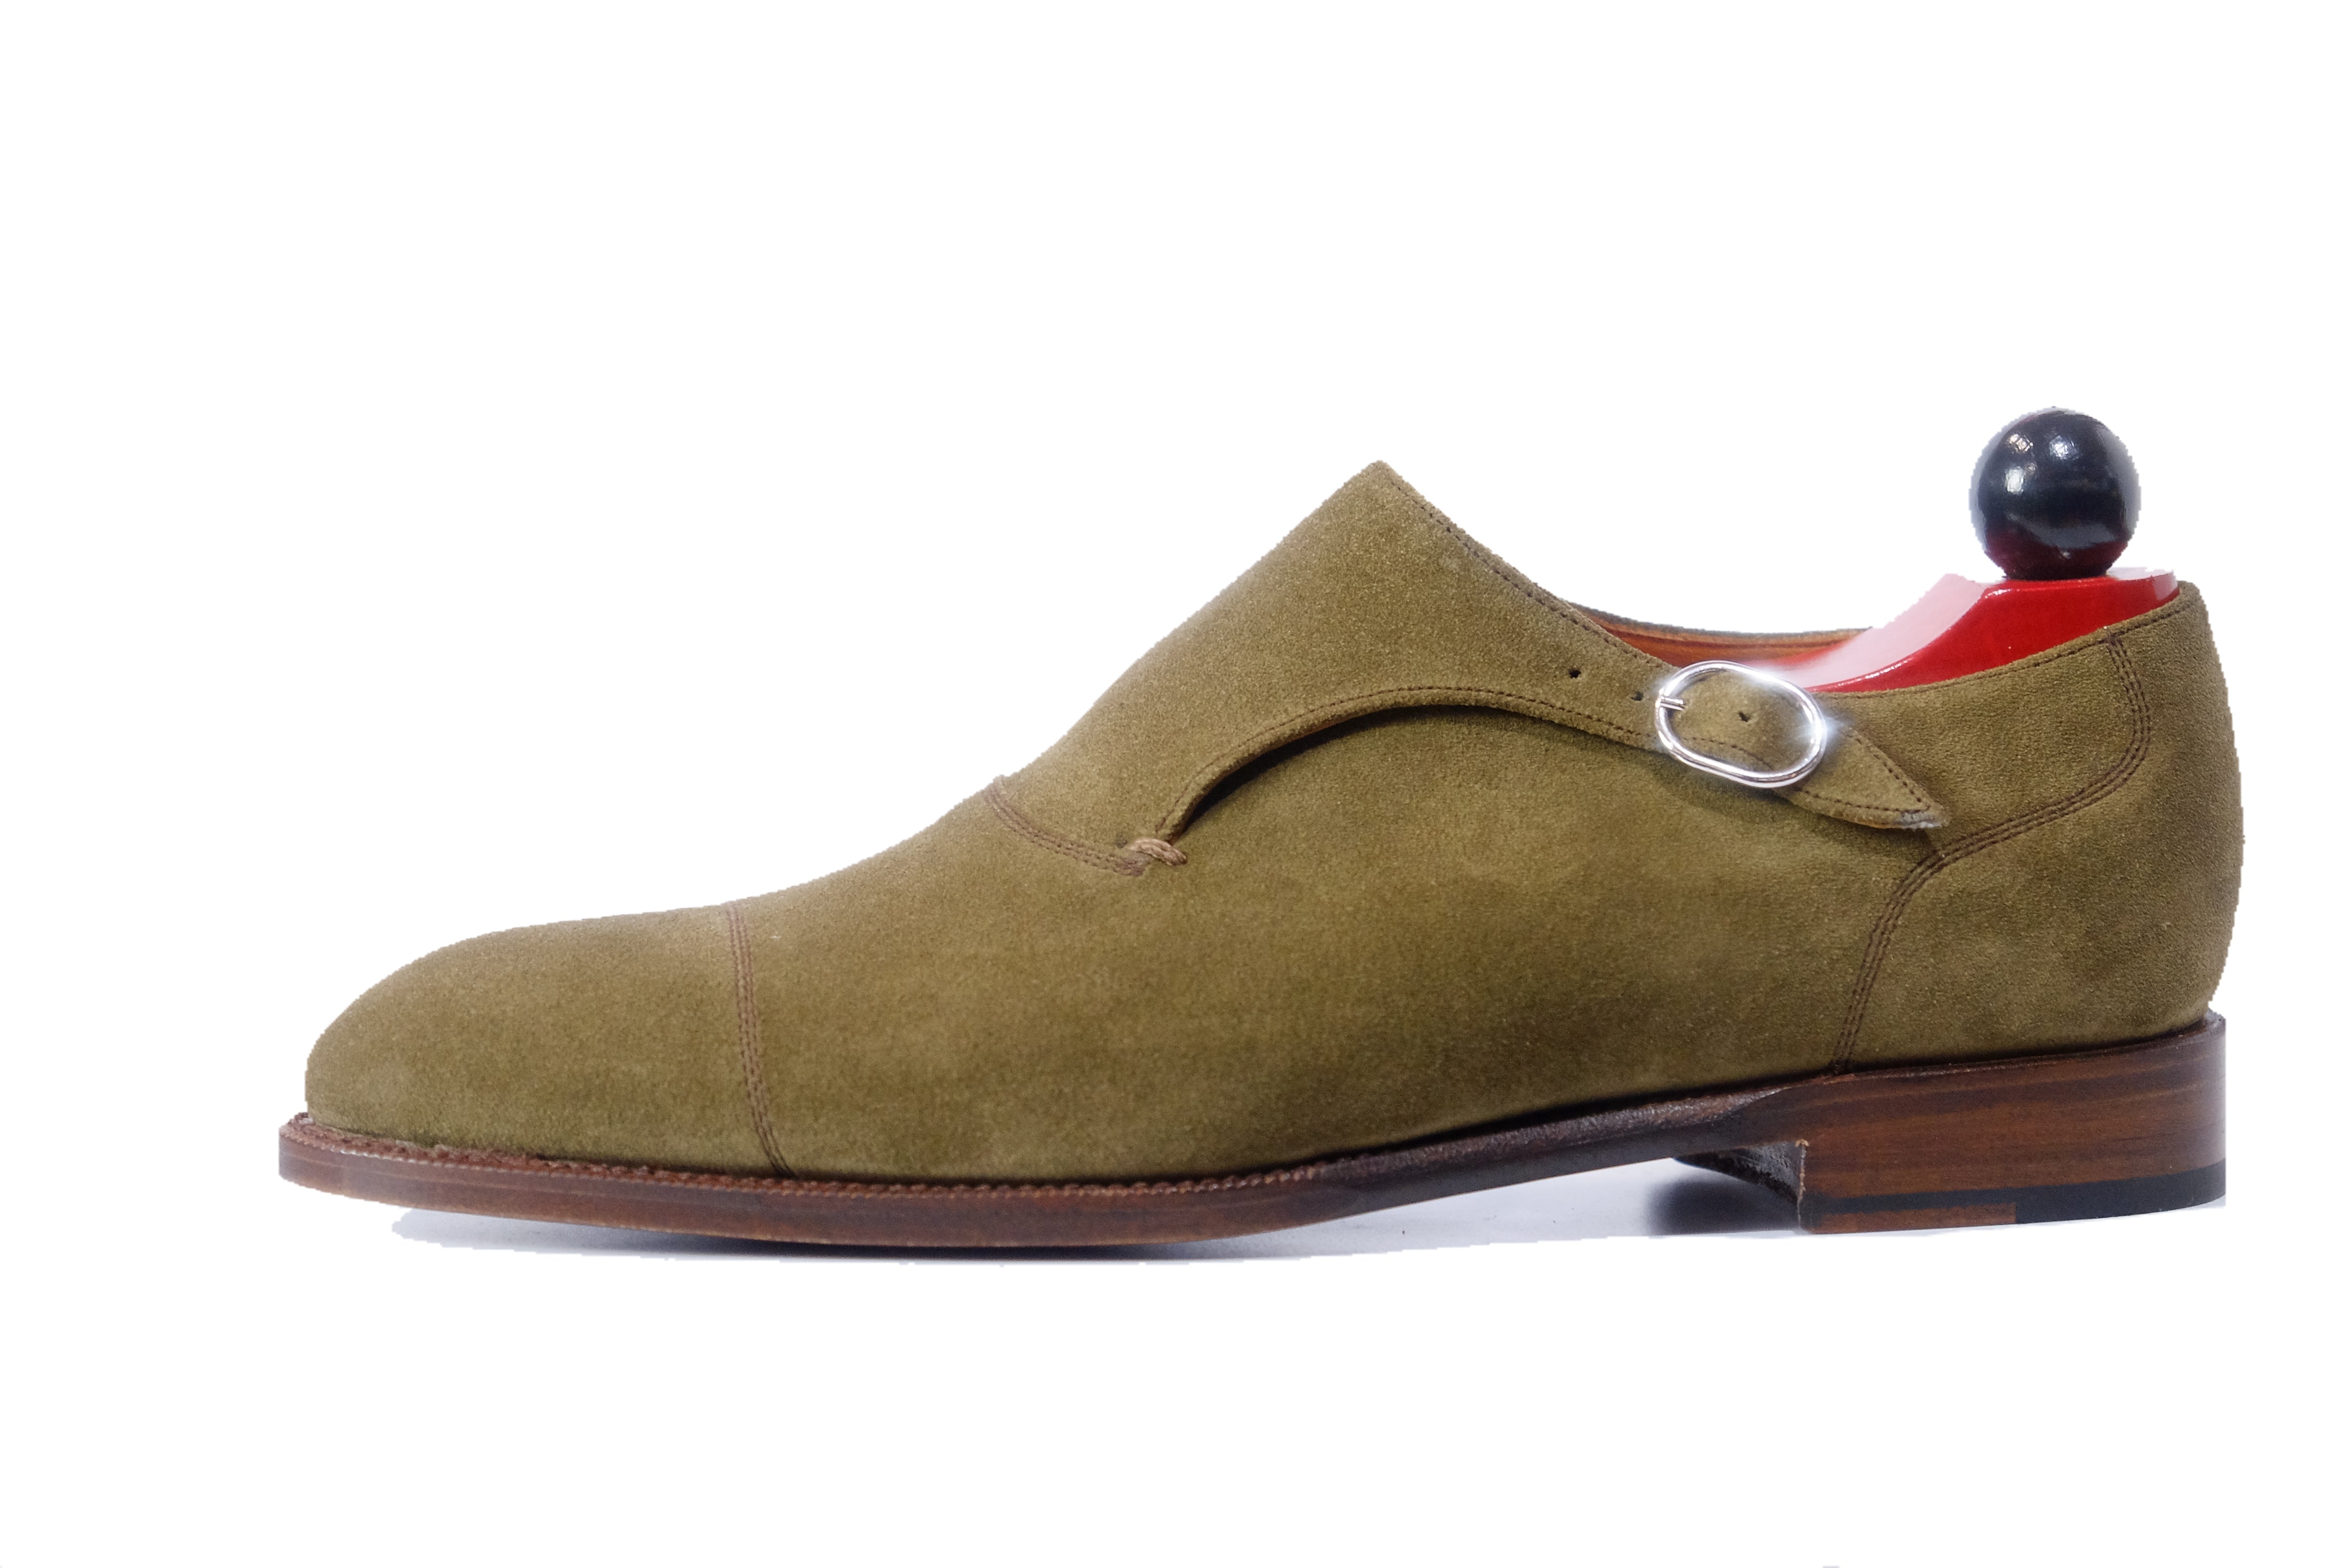 Fauntleroy - MTO - Olive Suede - NGT Last - Single Leather Sole